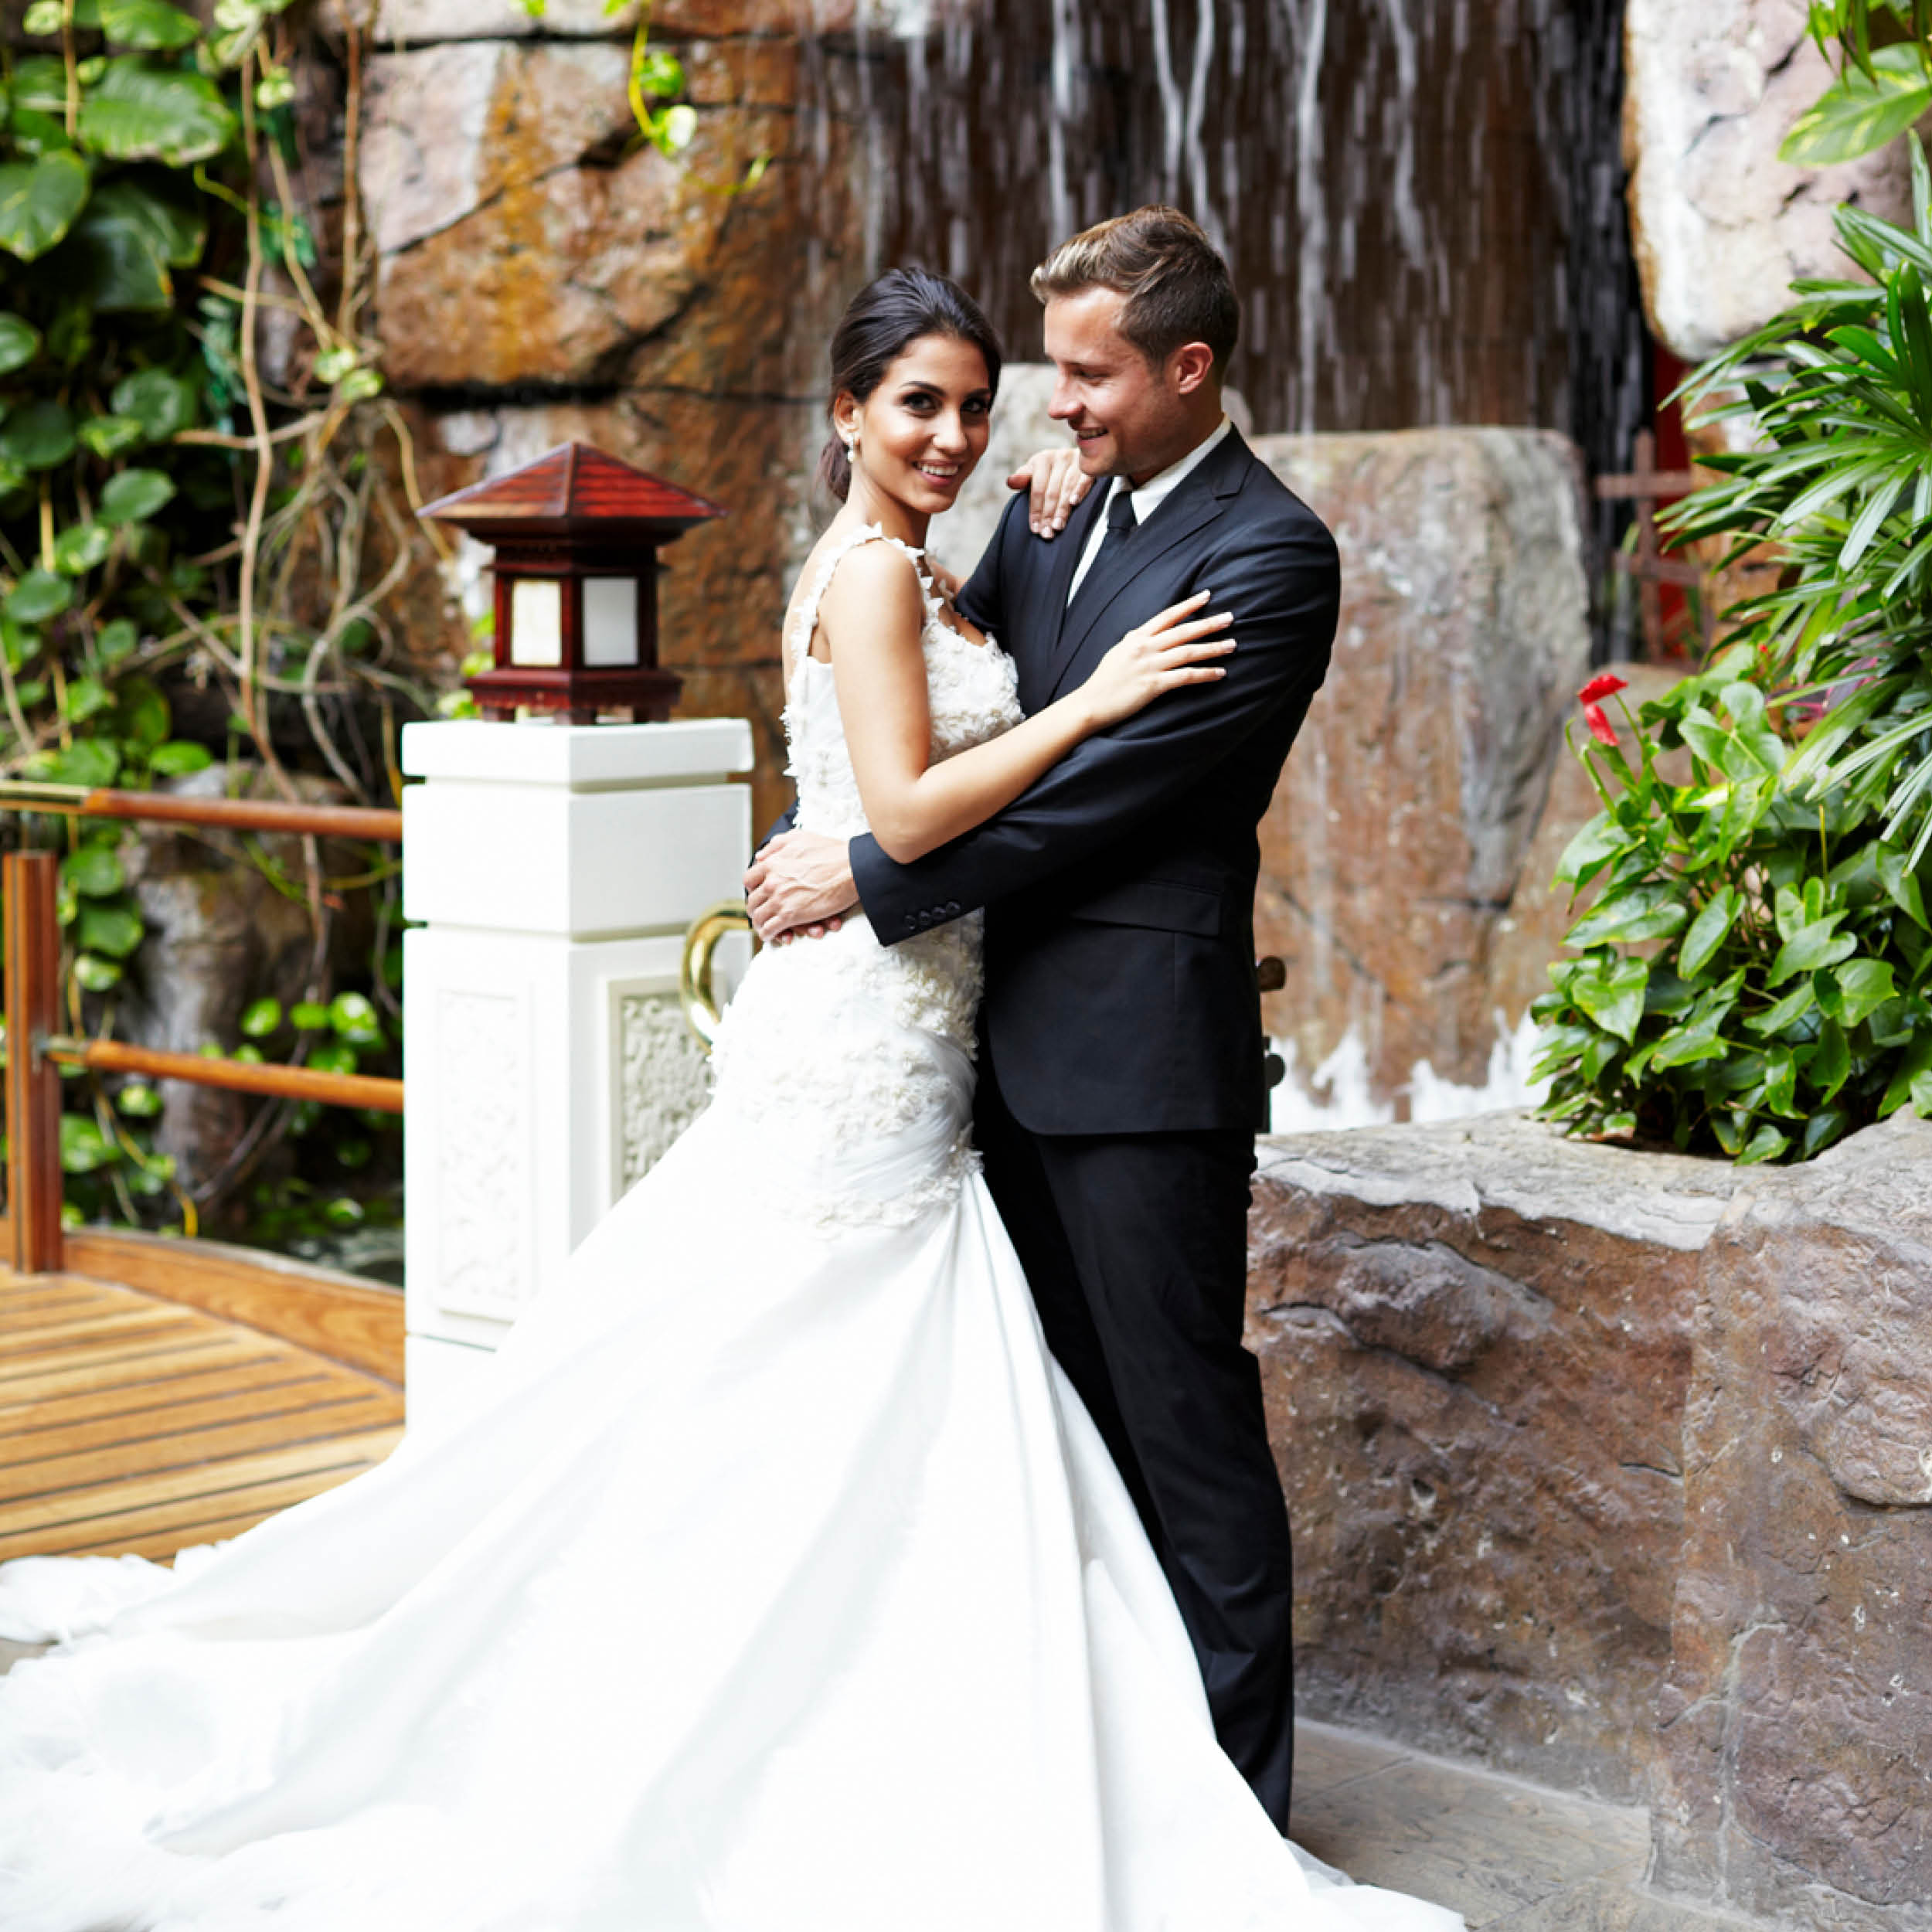 Happy wedding couple posing in front of water fountain